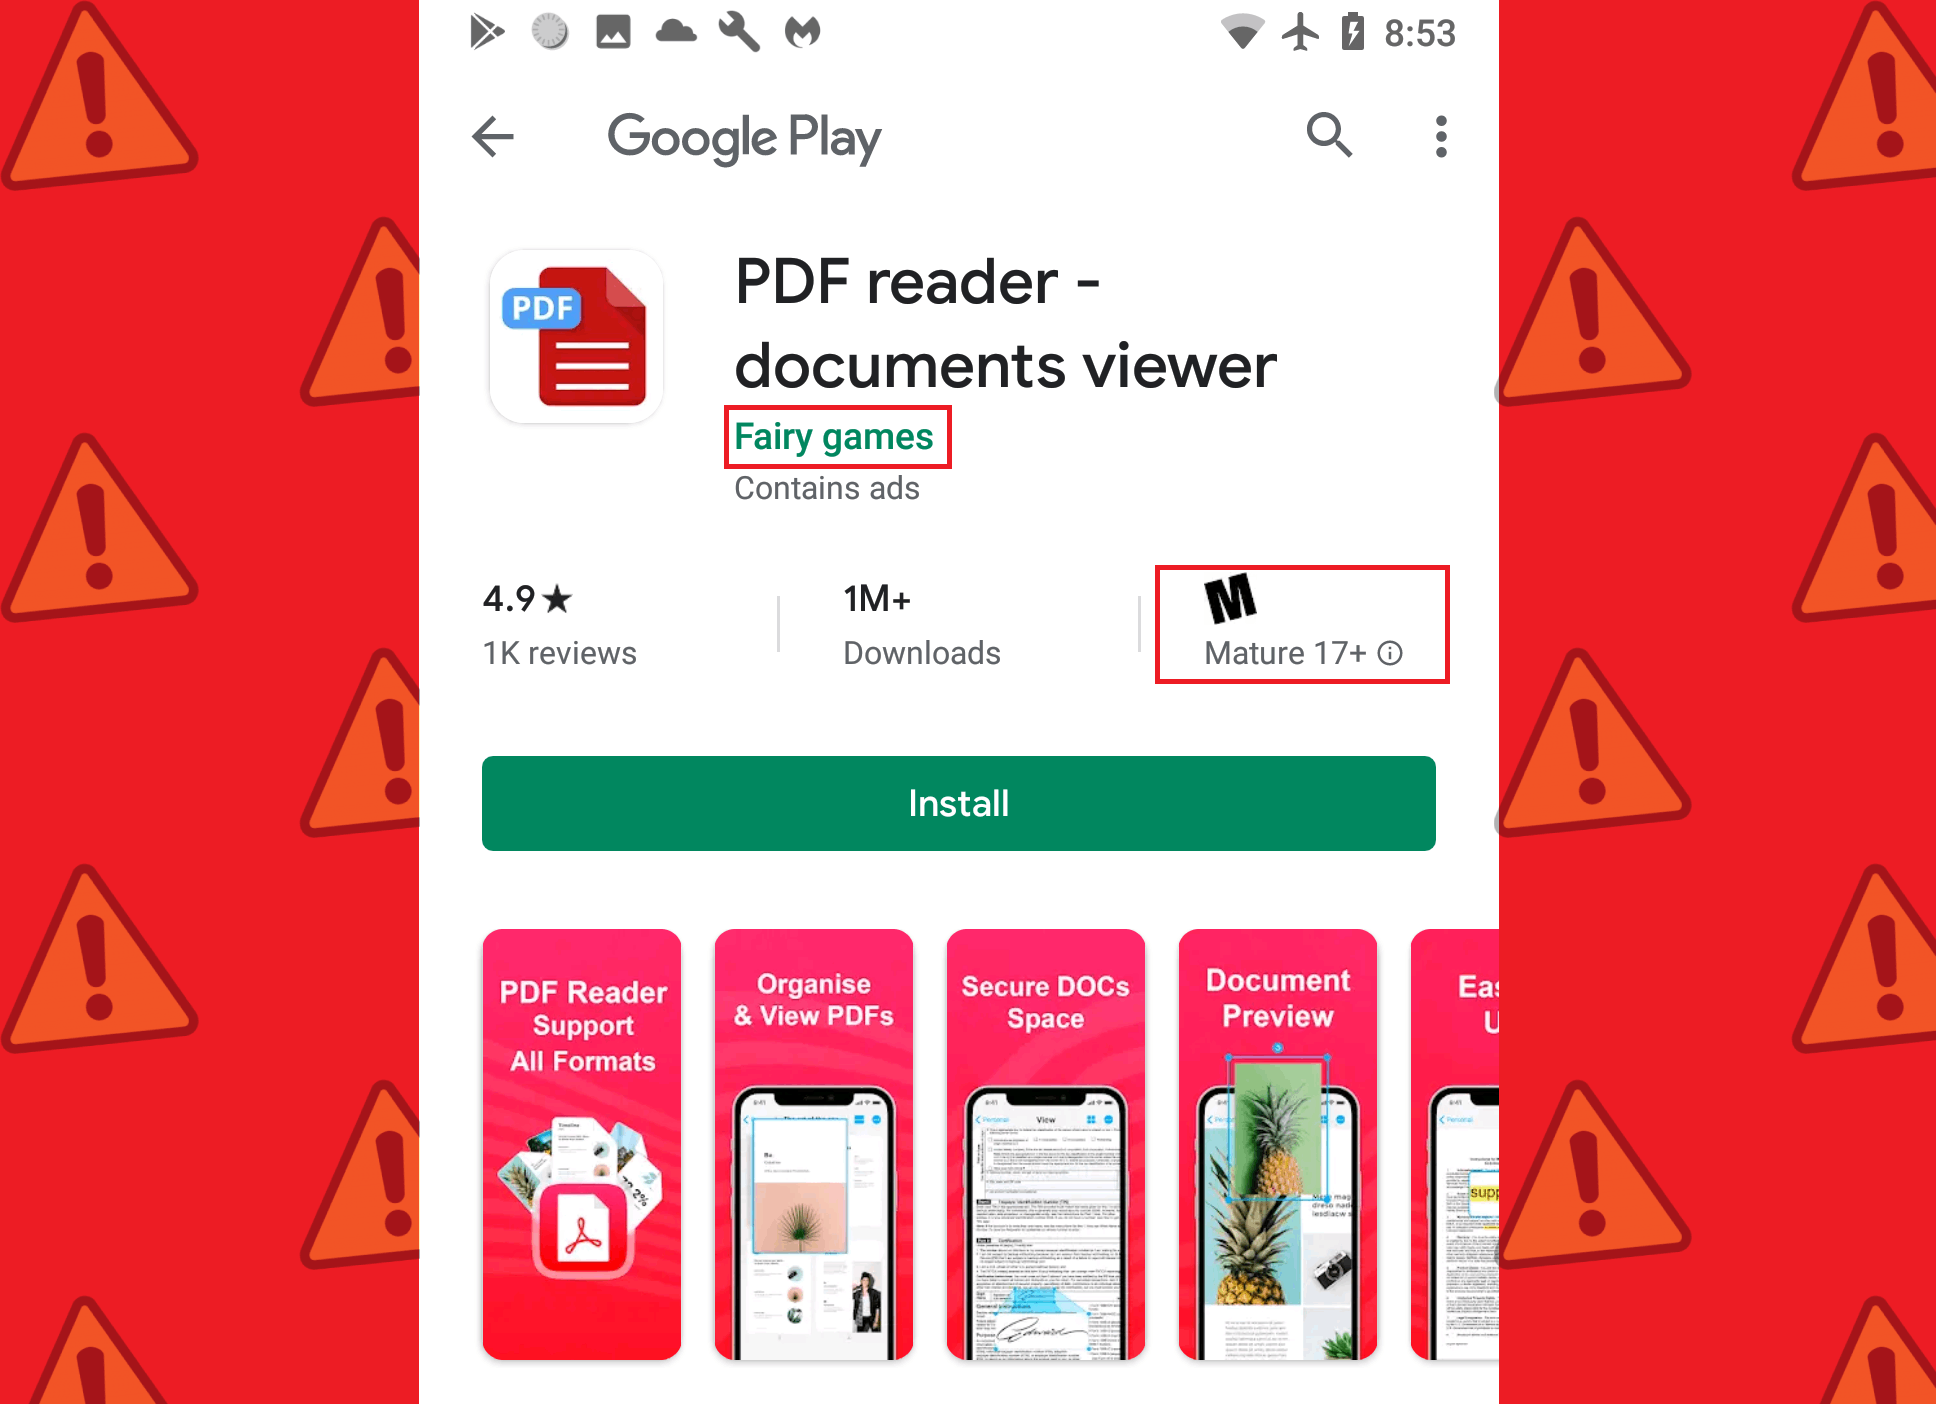 If the PDF reader app you are using is not working, try using an alternative PDF reader app from the App Store.
Search for a reputable PDF reader app and download it to your iPhone.